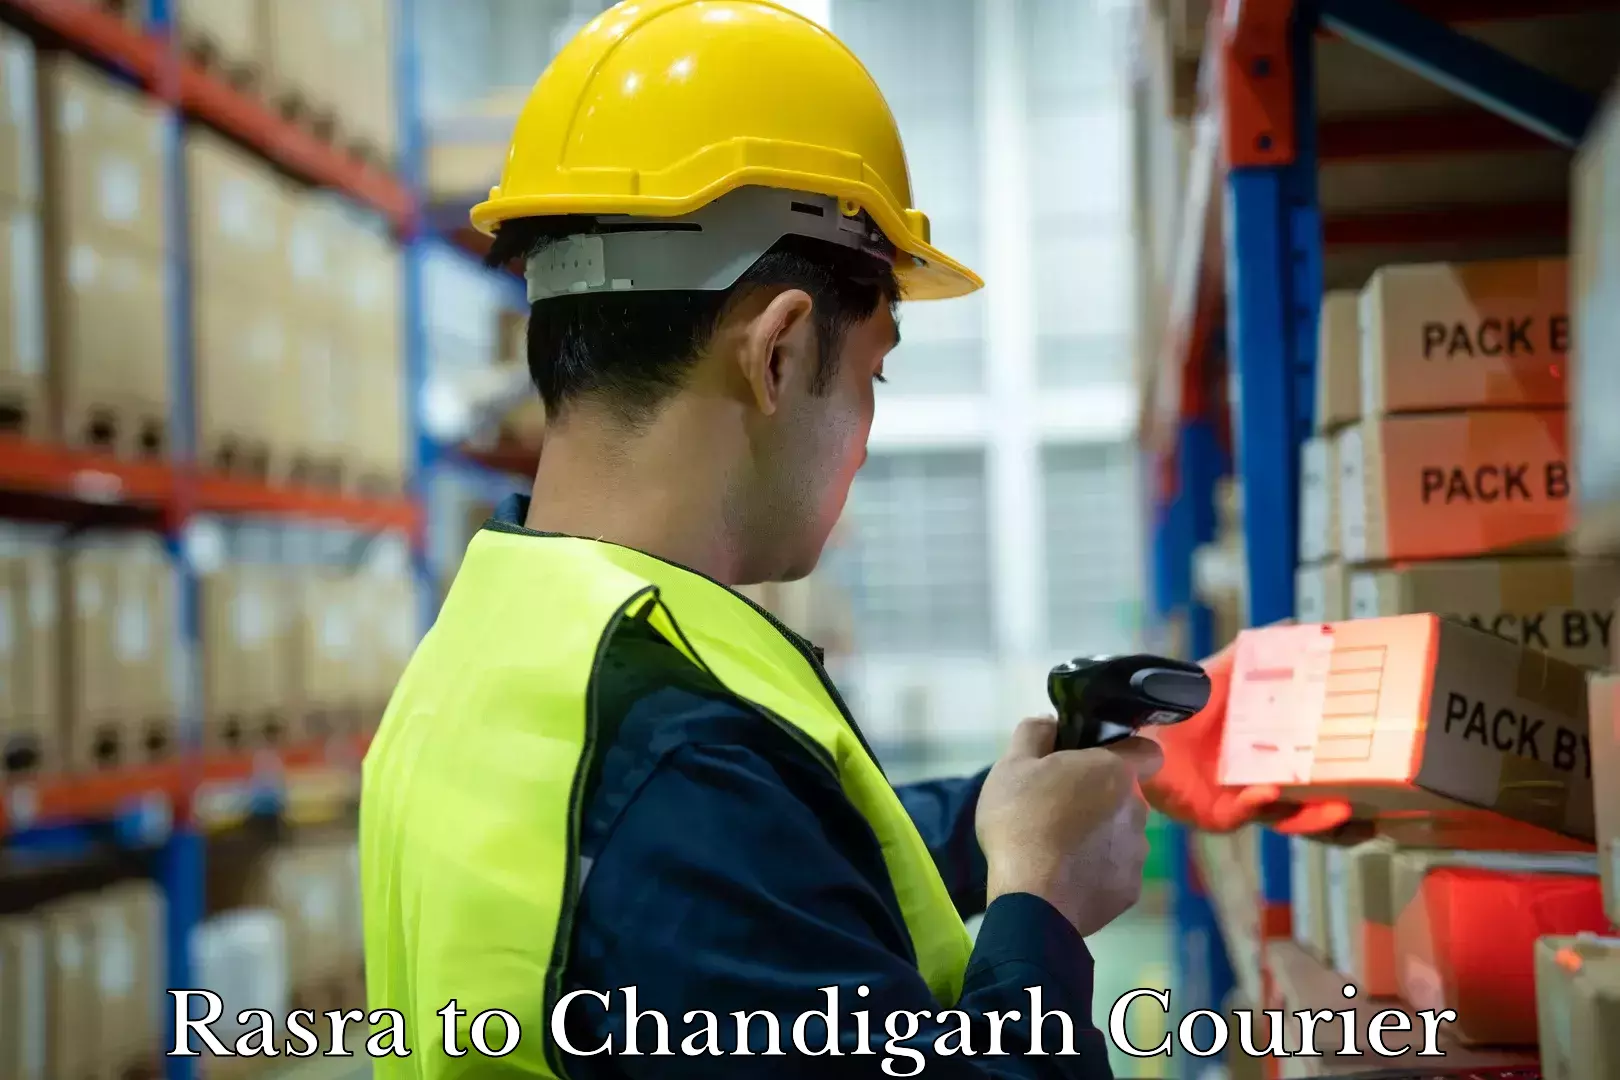 Baggage shipping service Rasra to Chandigarh